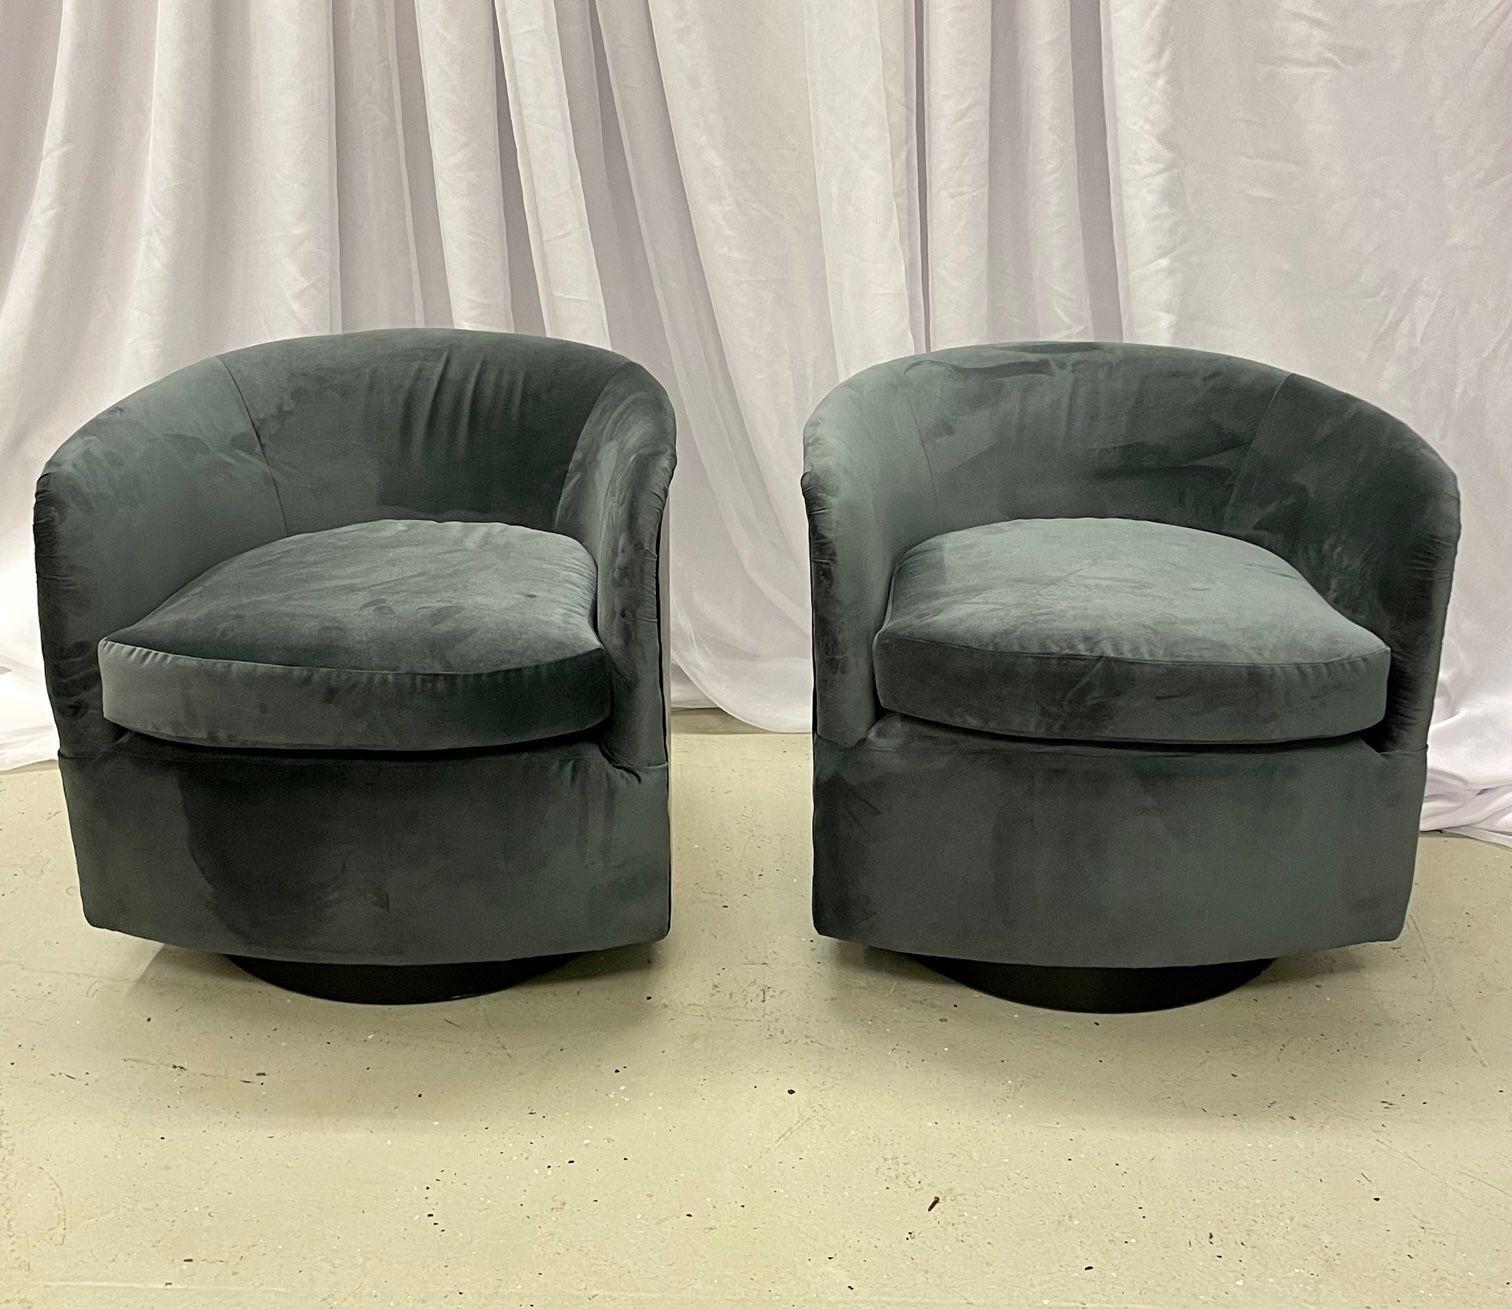 Pair of Milo Baughman Style Swivel / Lounge Chairs, Ceruse Oak, Velvet
 
Mid-century American designer swivel chairs with bent plywood backs and a gorgeous black cerused oak finish. Each chair has been re-upholstered in a warm blue velvet fabric.